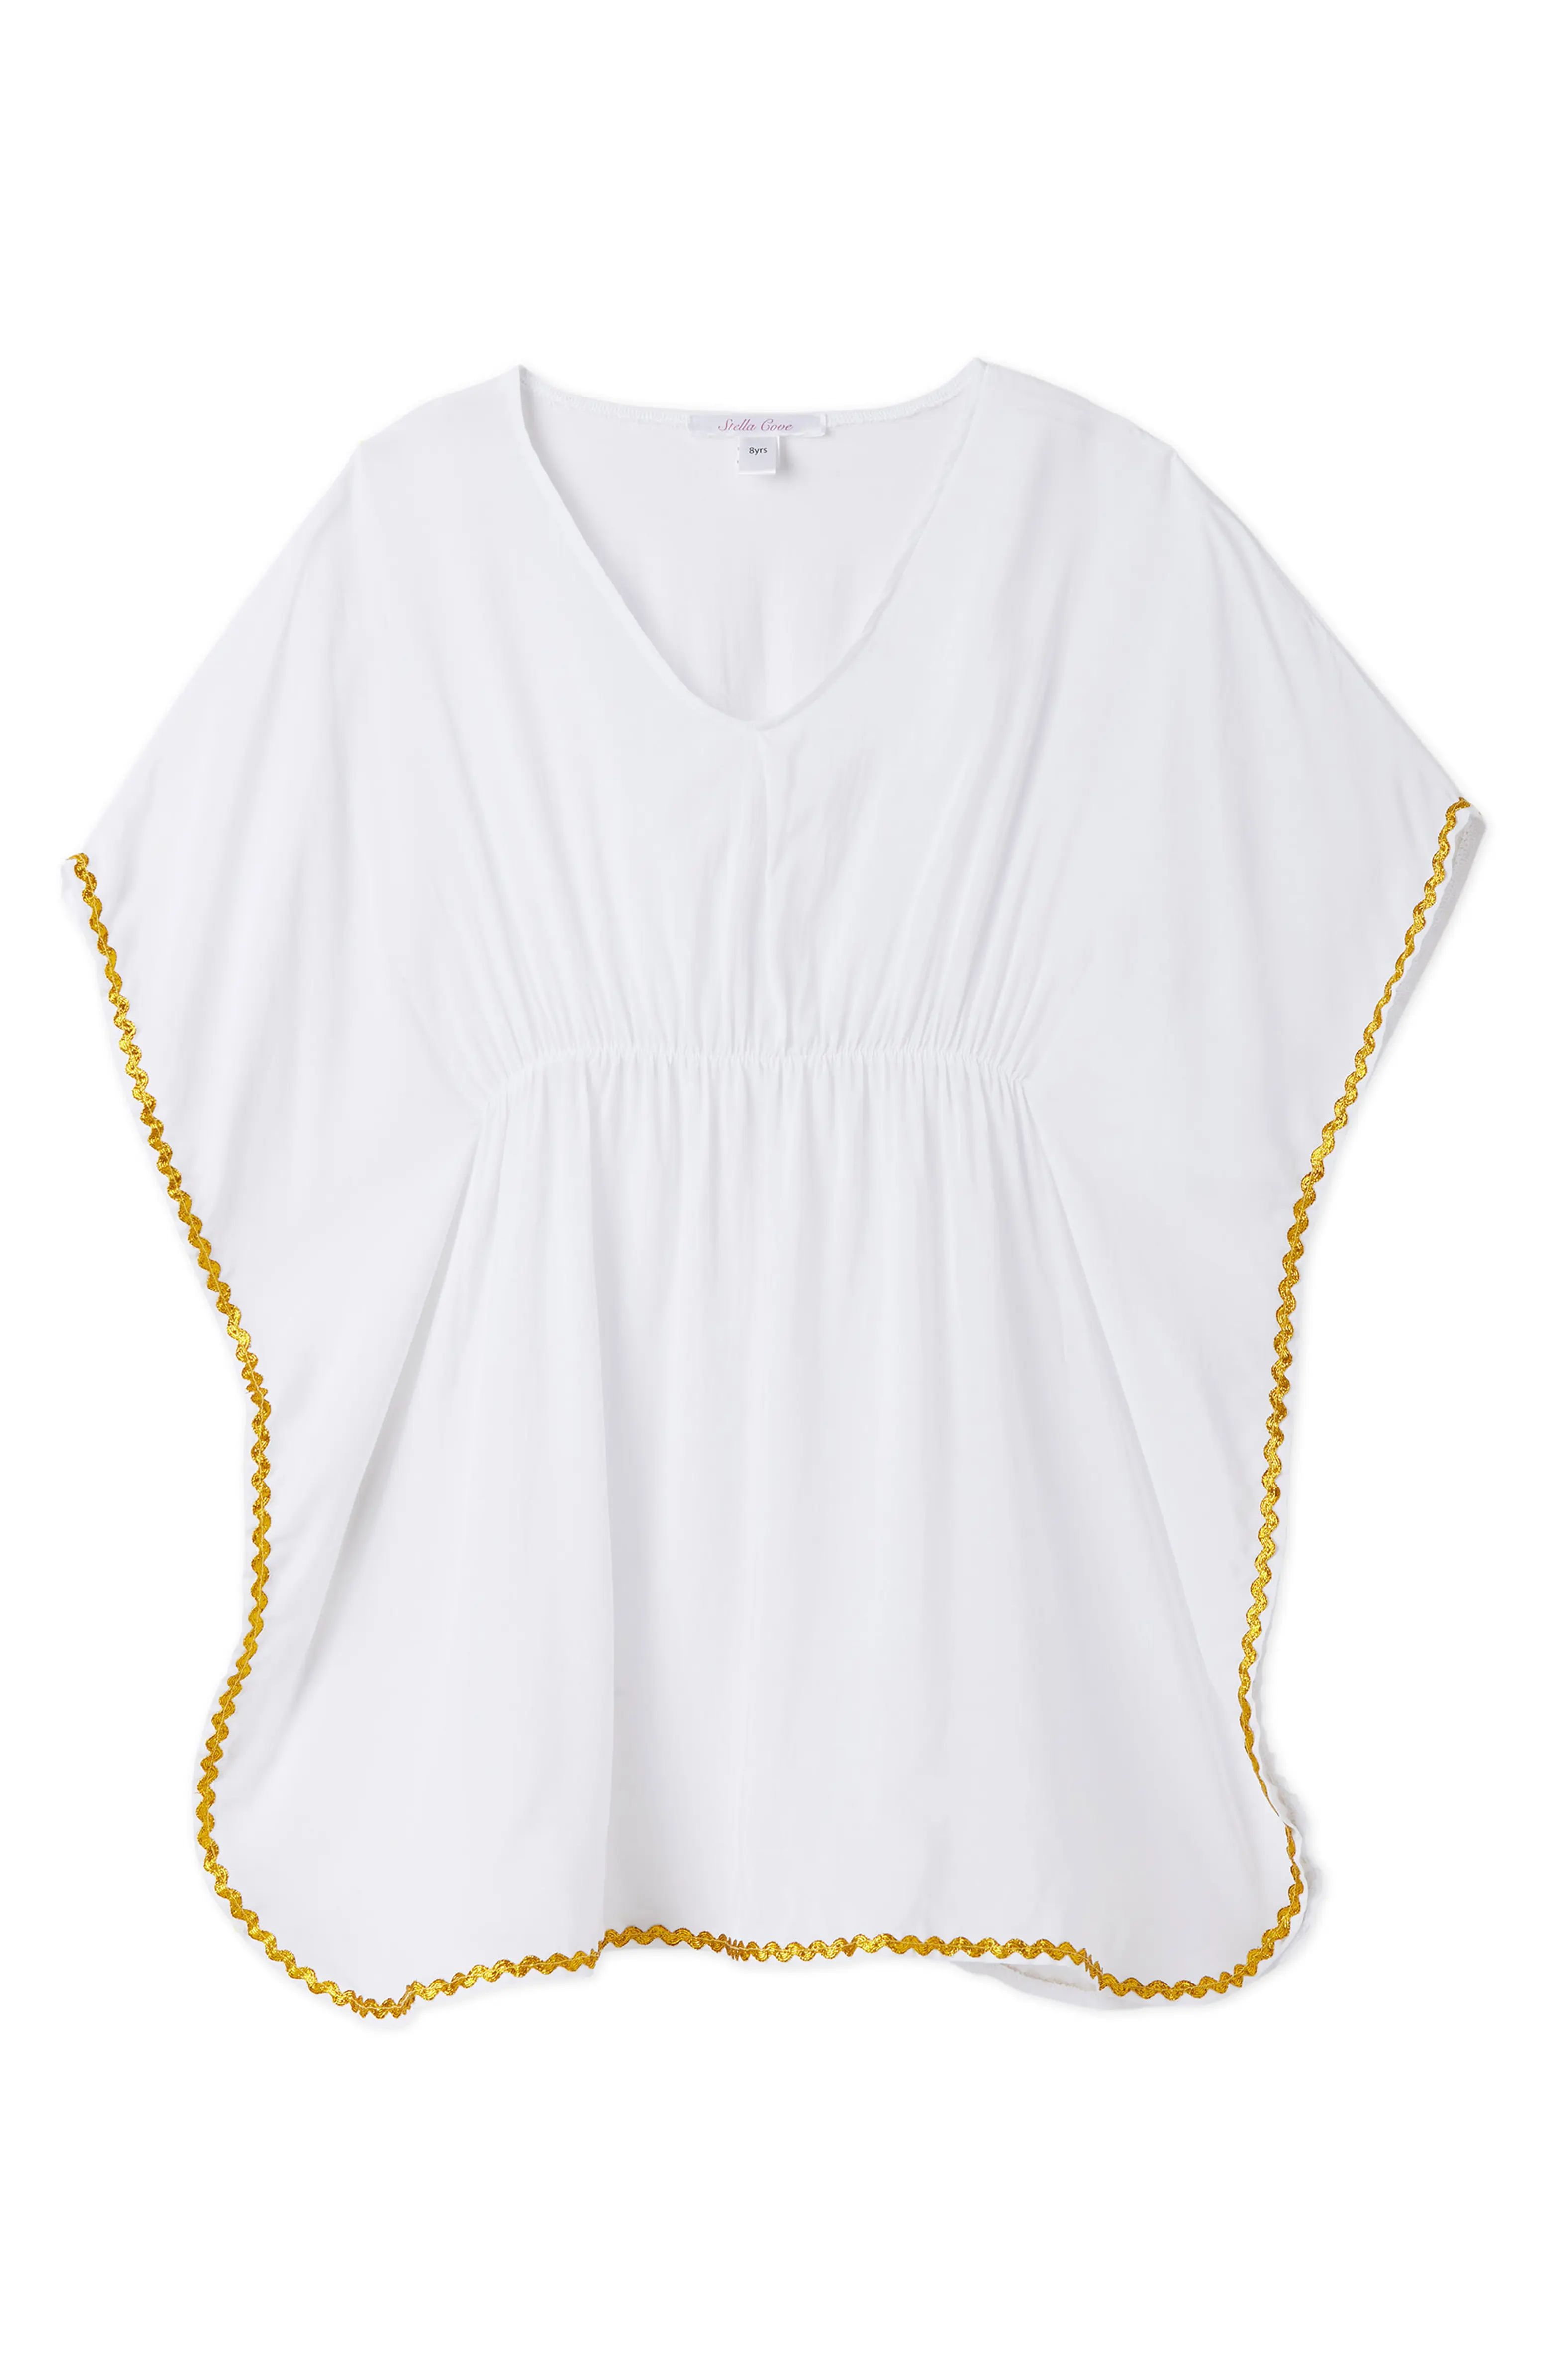 Metallic Trim Cover-Up Poncho | Nordstrom